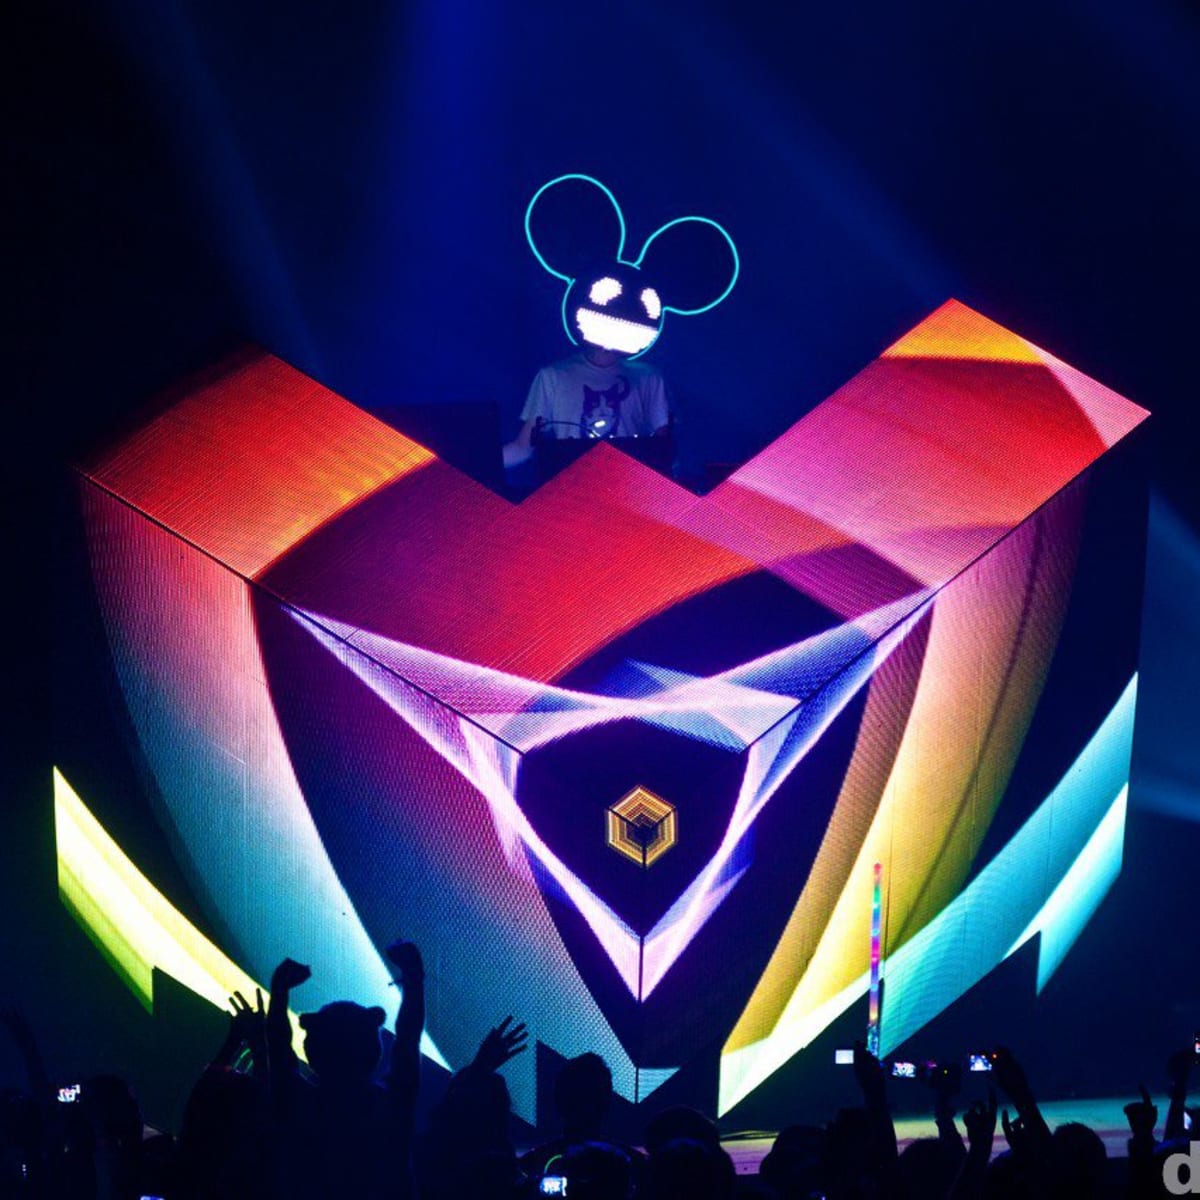 Deadmau5 Drops Vocal Heavy Id During Cubev3 Show At Avant Gardner In Brooklyn Edm Com The Latest Electronic Dance Music News Reviews Artists - electronic dance music roblox